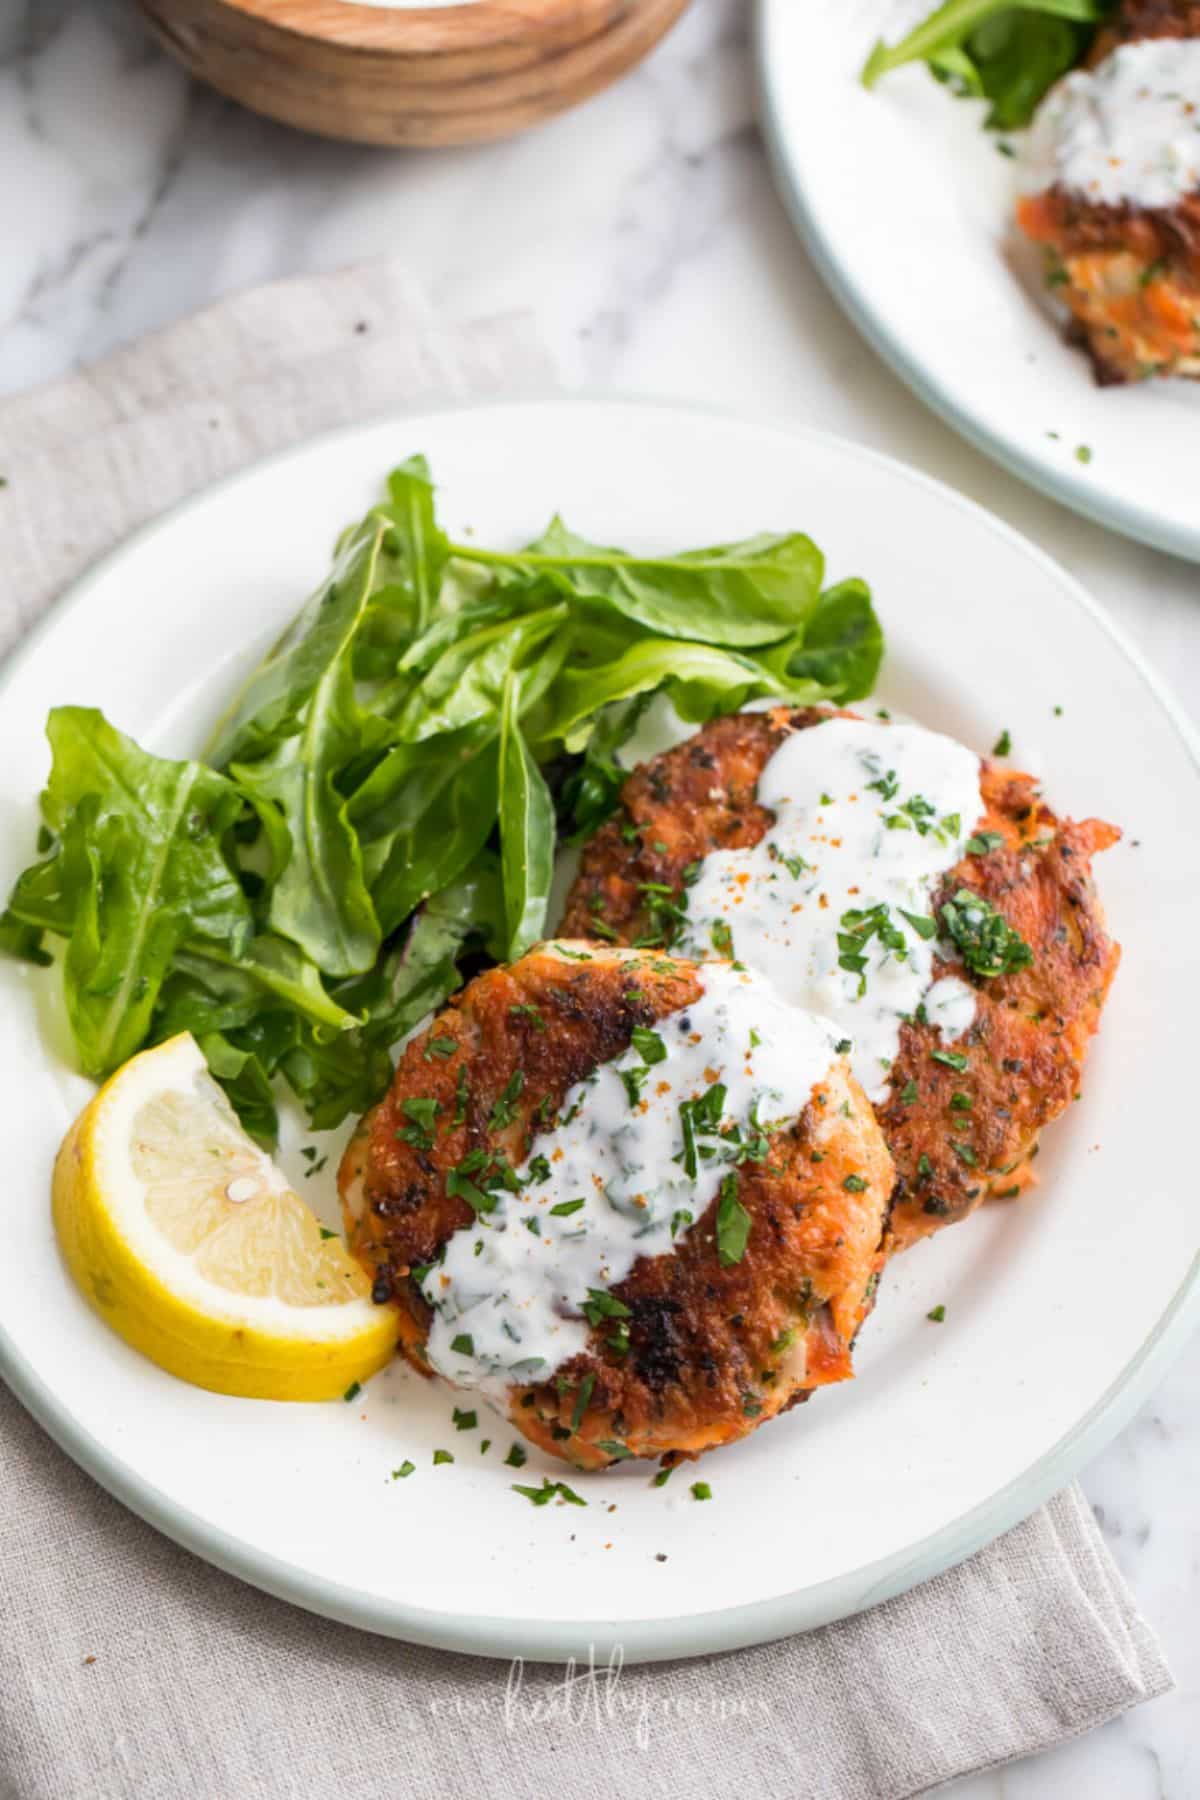 Mouth-watering Salmon Patties and Lemon Garlic Sauce on a white plate.